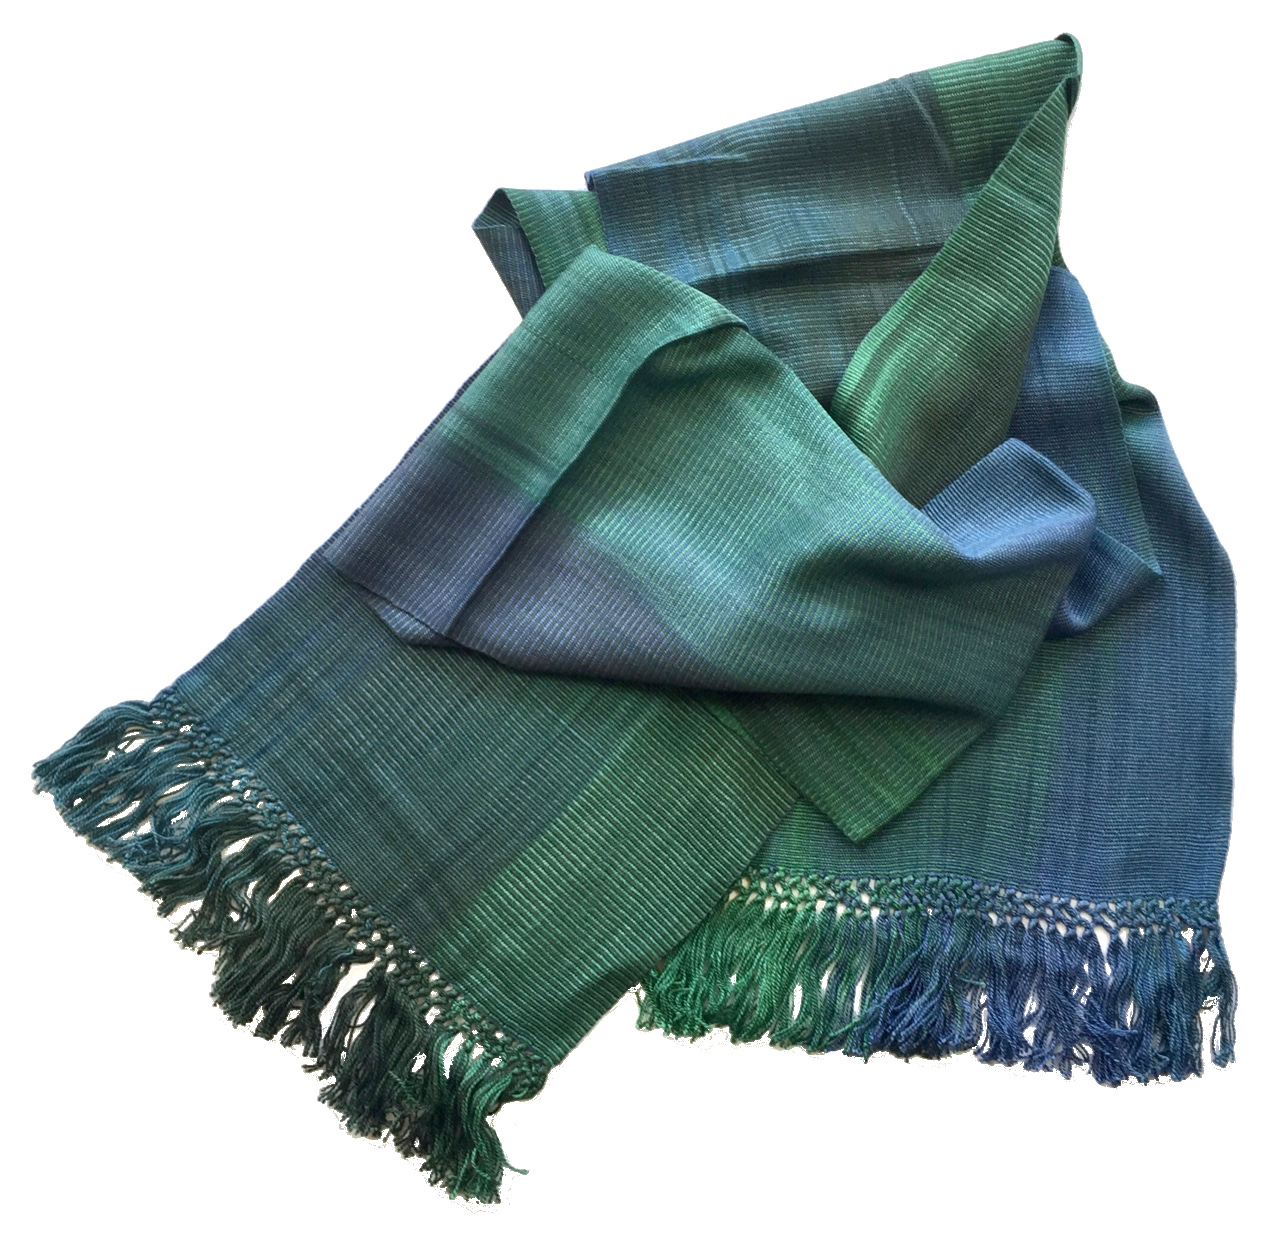 Emerald and Sapphire (Green and Blue) - Lightweight Bamboo Handwoven Scarf 8 x 68